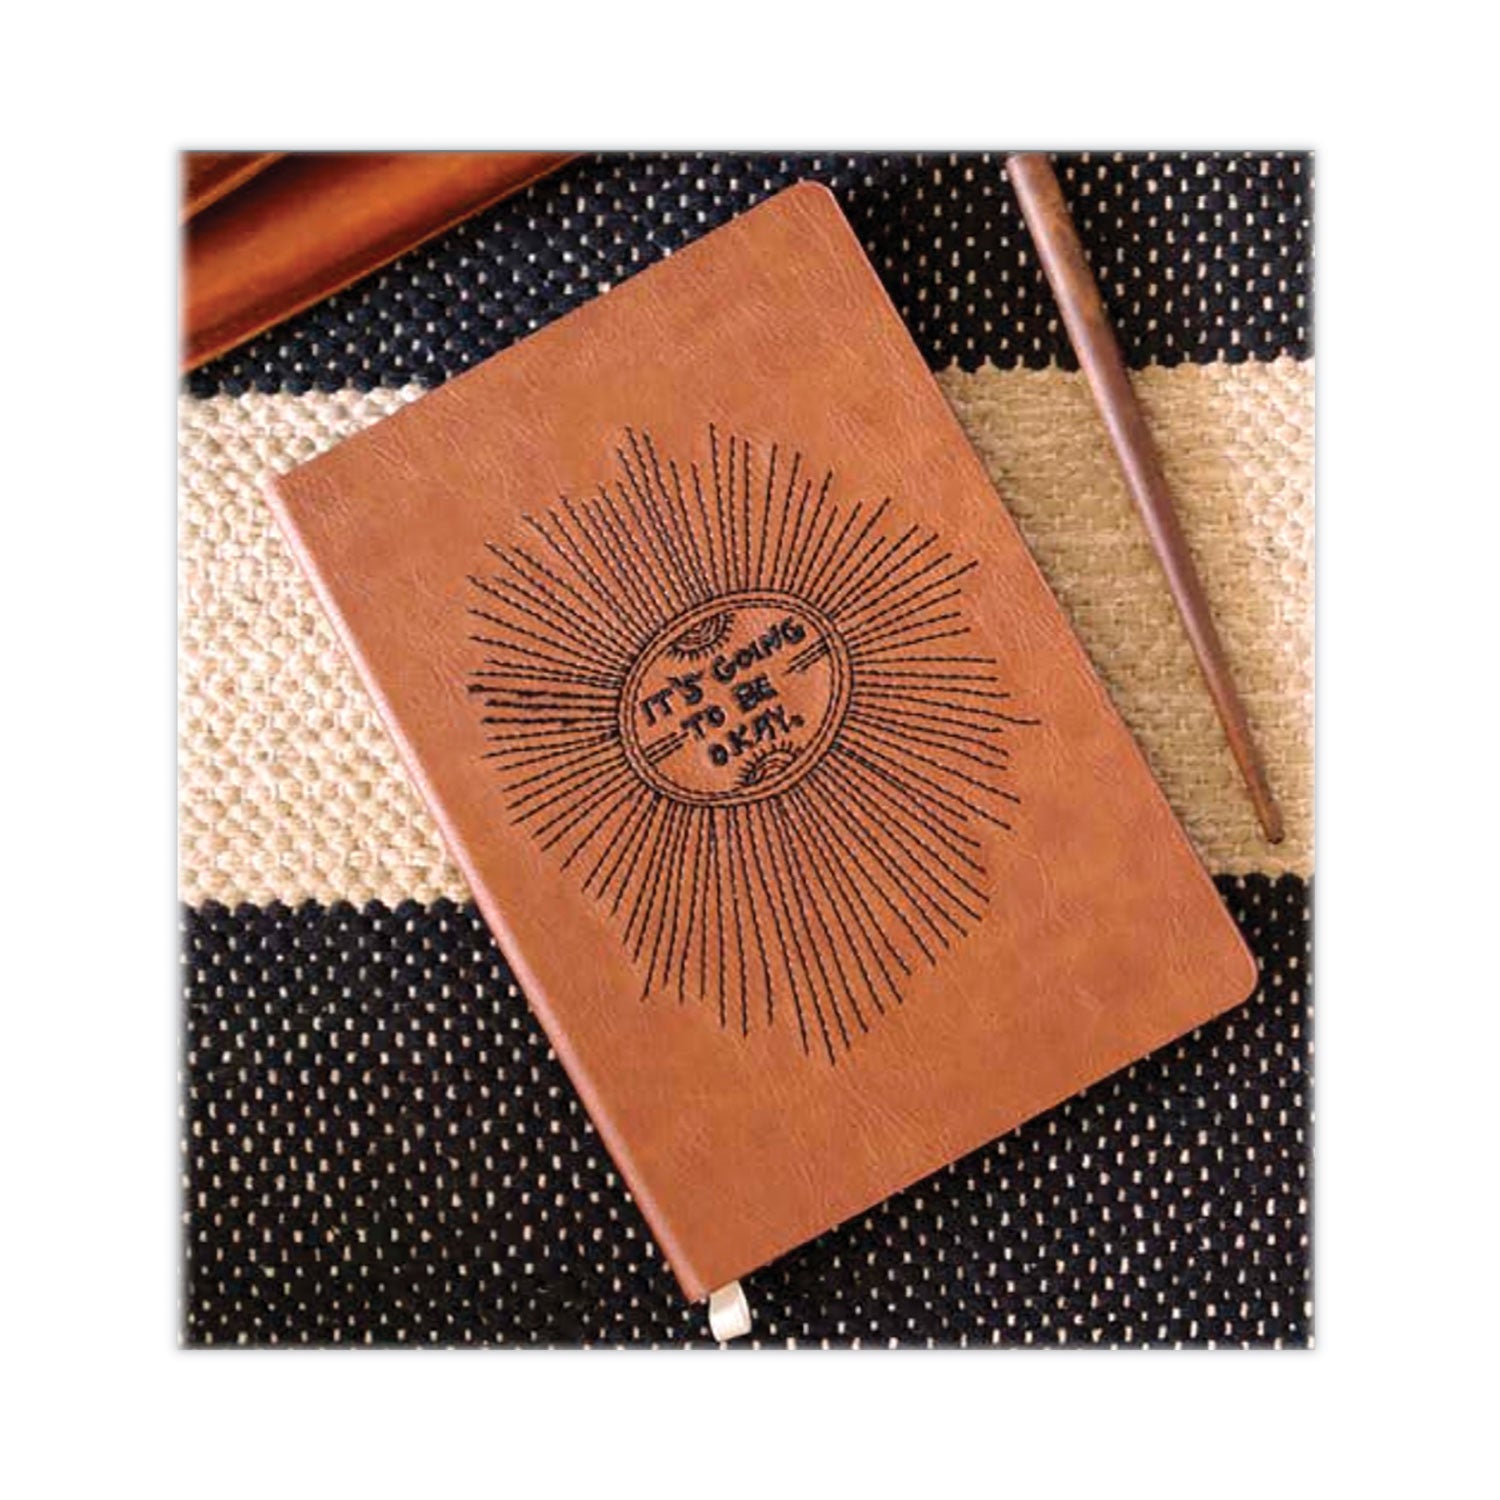 vegan-leather-layflat-flexible-cover-journal-its-going-to-be-okay-college-rule-brown-black-cover-72-8-x-55-sheets_dnkahbc1009l - 2